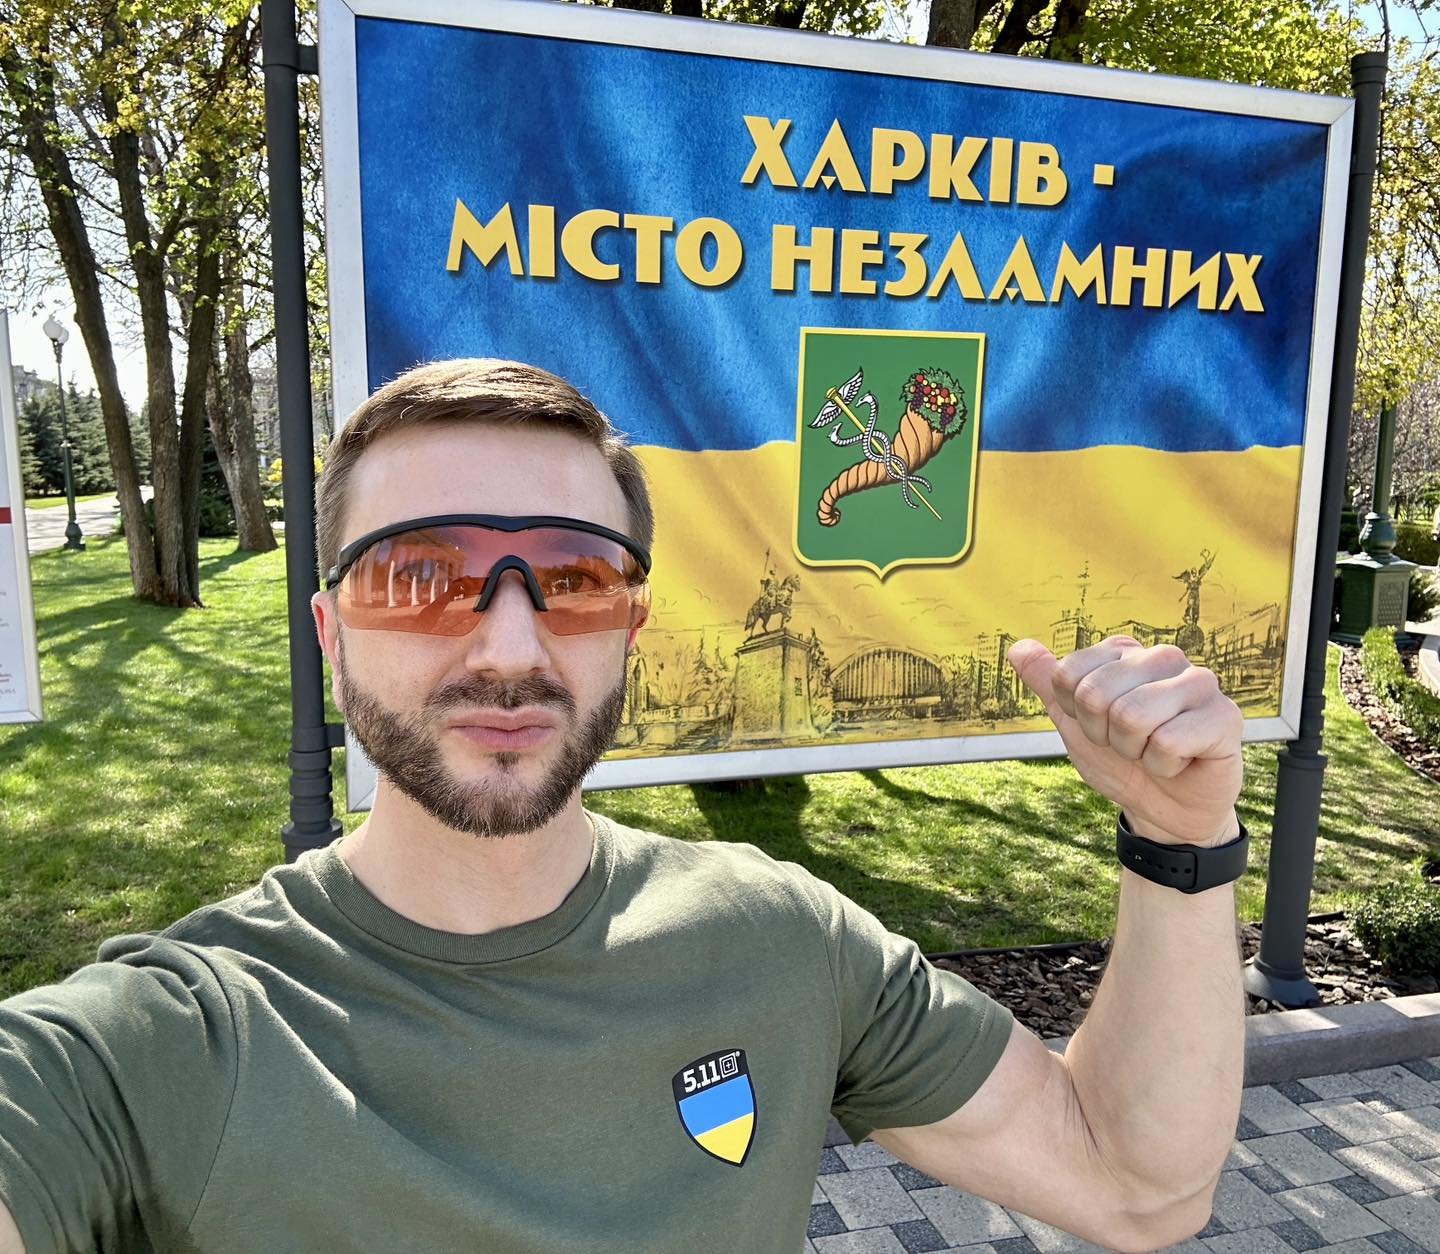 Ukrainian people are grateful to all the defenders for their immense bravery and keeping most of the territories safe and secure. But special love for Ukraine is also found in hearts of those who left their homes and came to help suffering nation to 